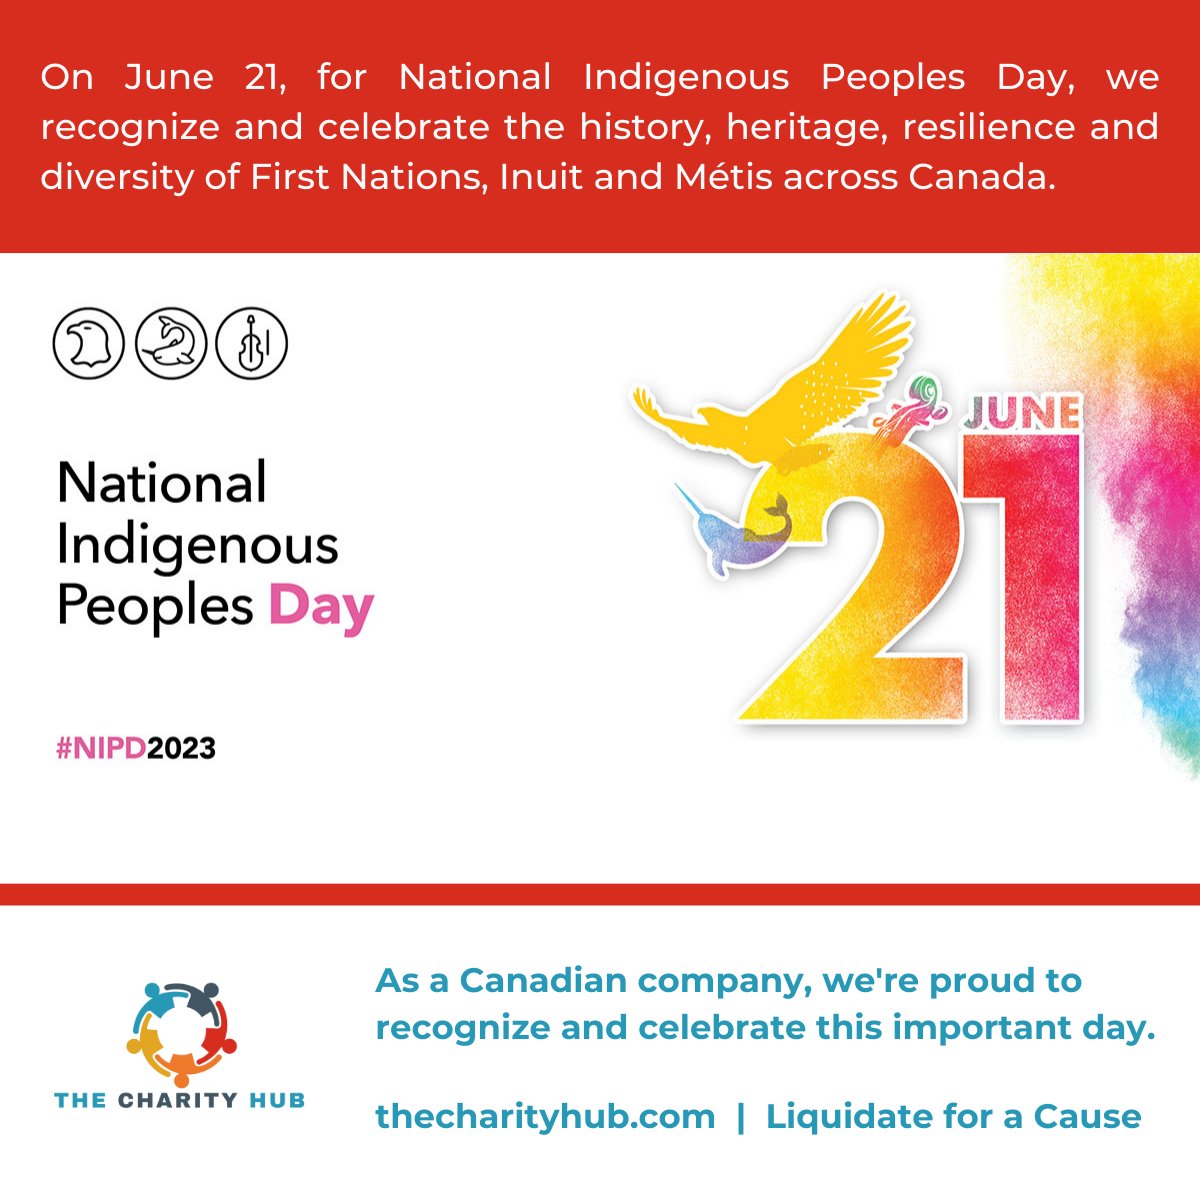 For generations, many Indigenous groups and communities have celebrated their culture and heritage on/around June 21 because of the significance of the summer solstice as the longest day of the year. #NIHM2023 #NIPD2023 #IndigenousPeoplesDay #truthandreconciliation #canada